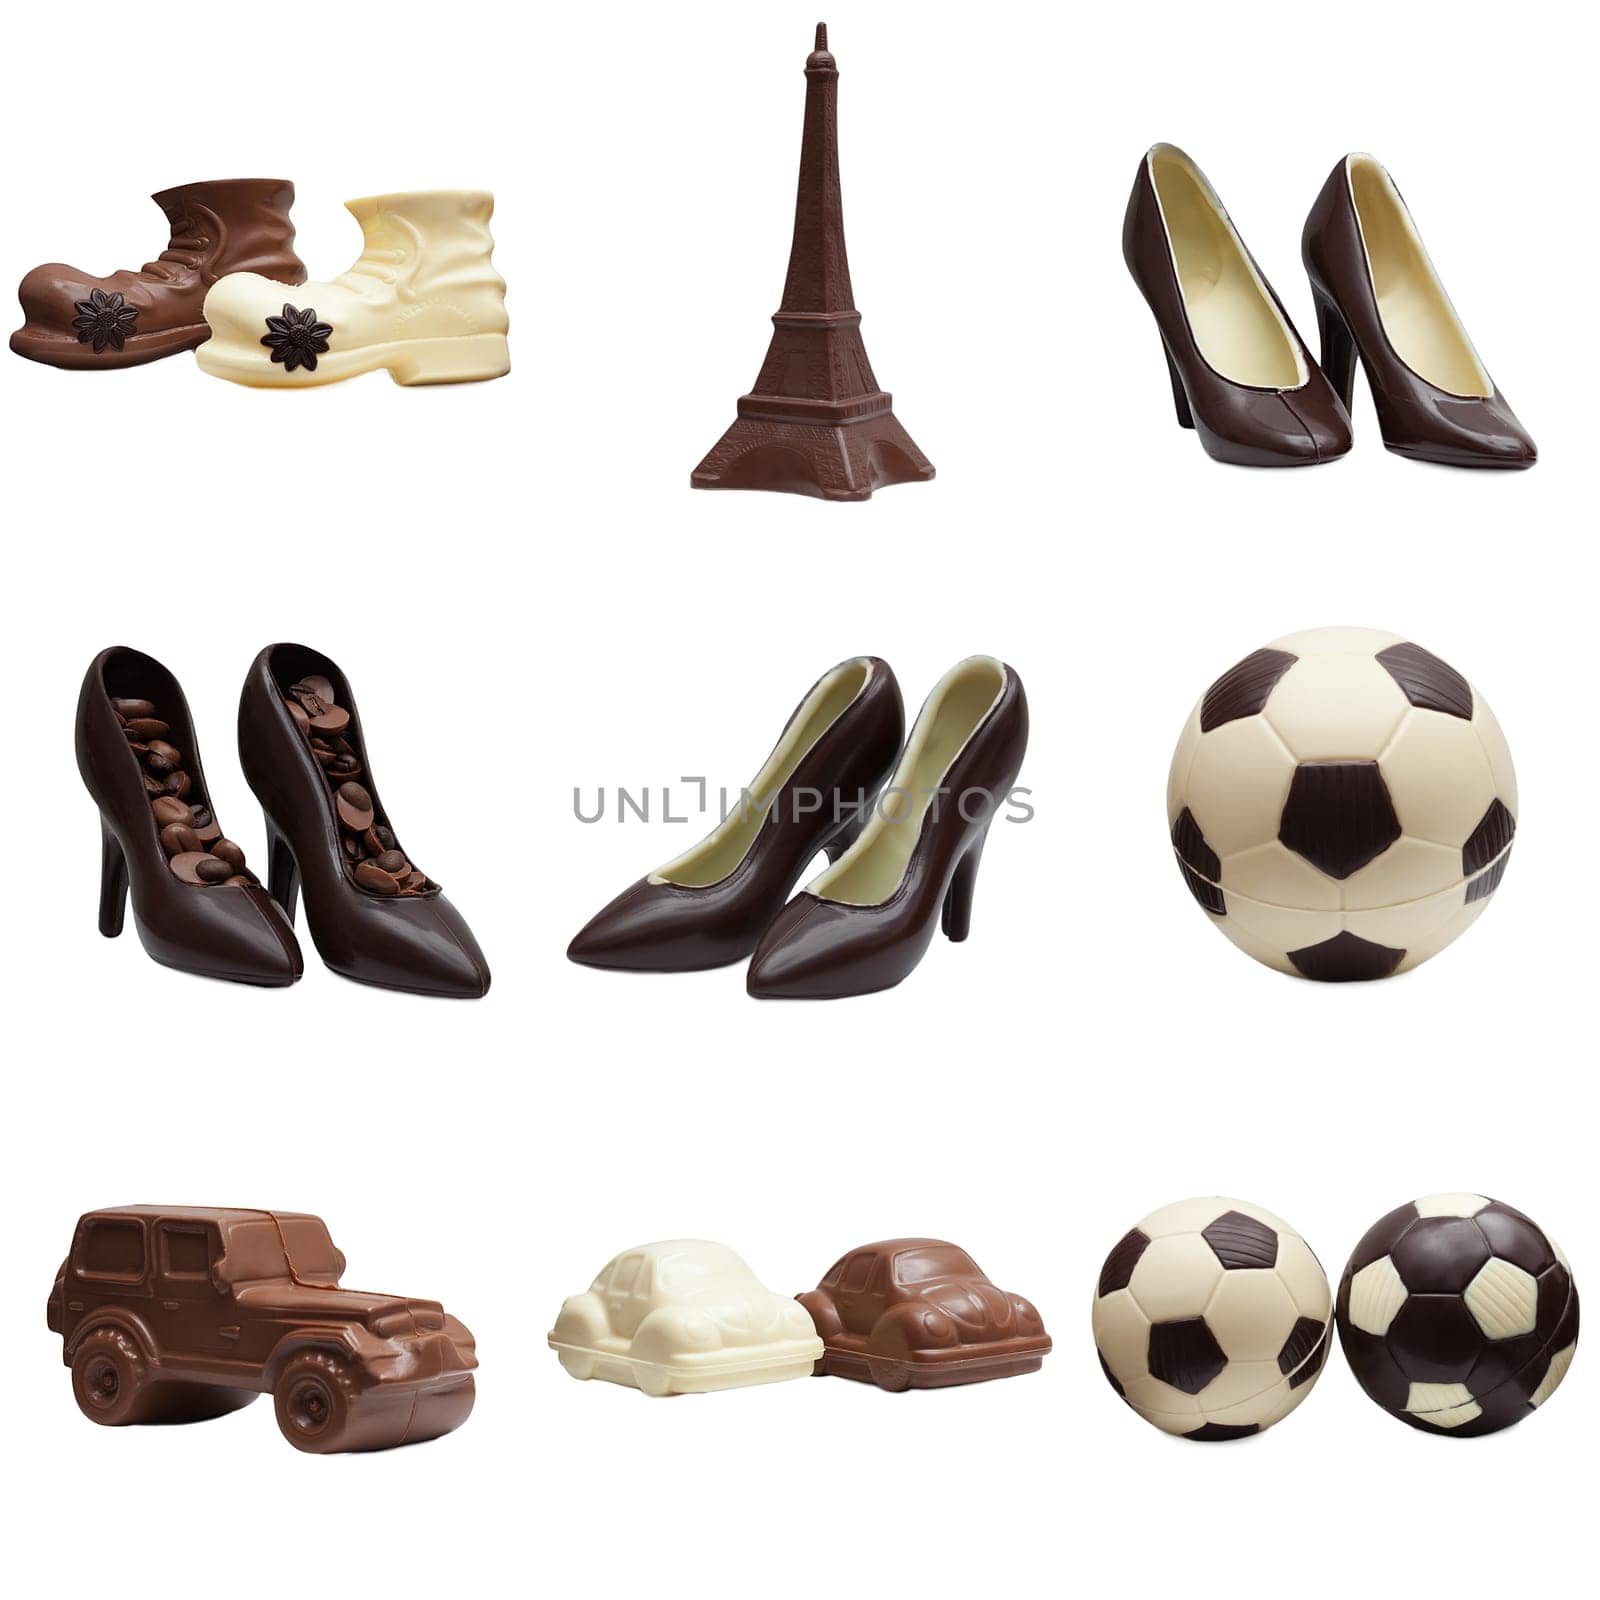 Collage of various chocolate figures. Studio photo, isolated on white